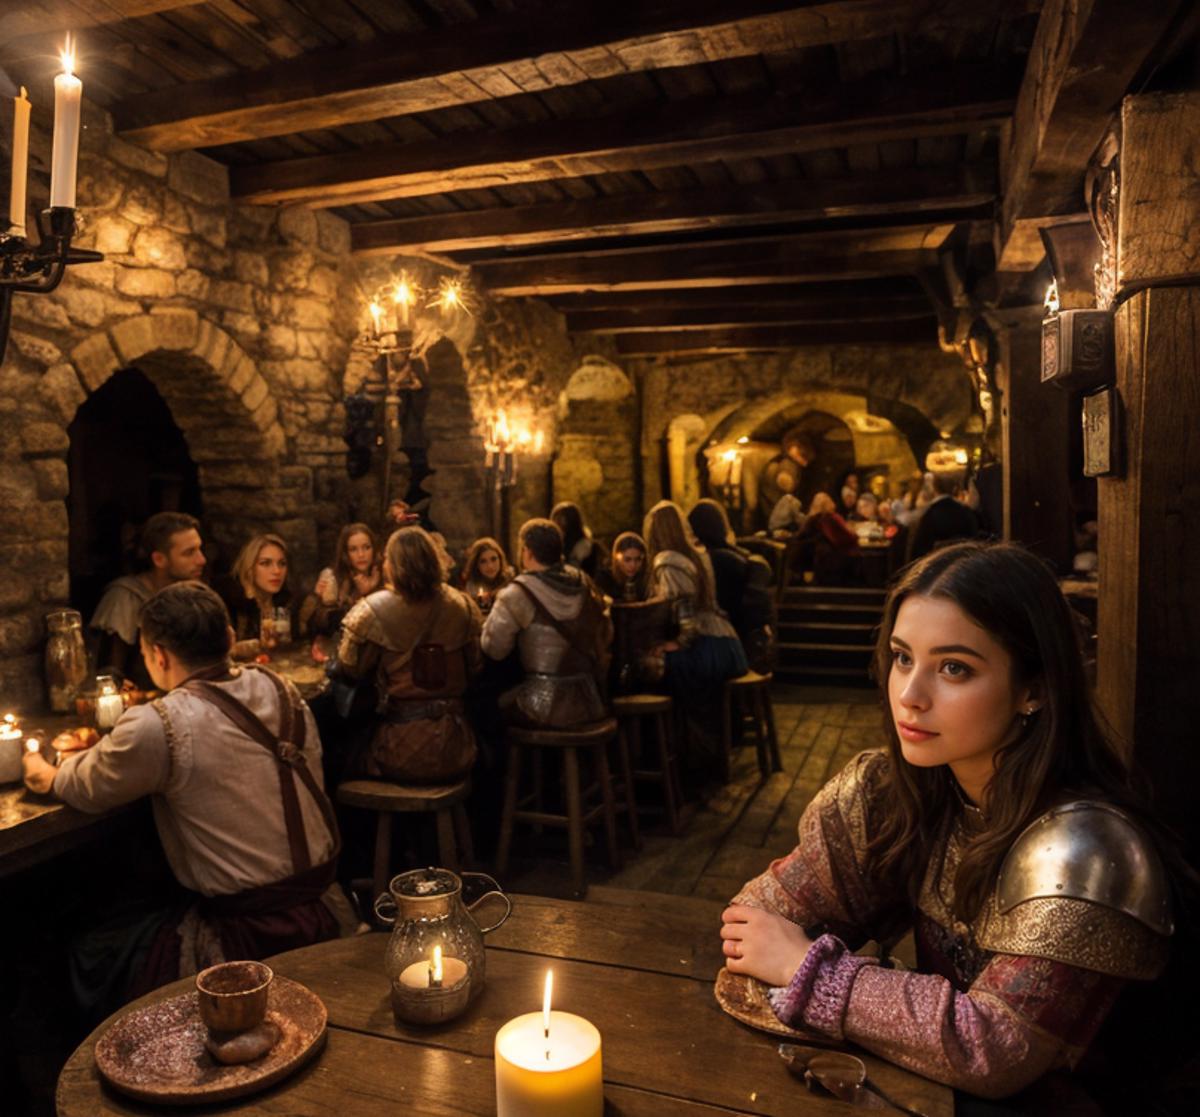 A Medieval Themed Restaurant with People Dining and a Woman in a Knight's Outfit Sitting at a Table